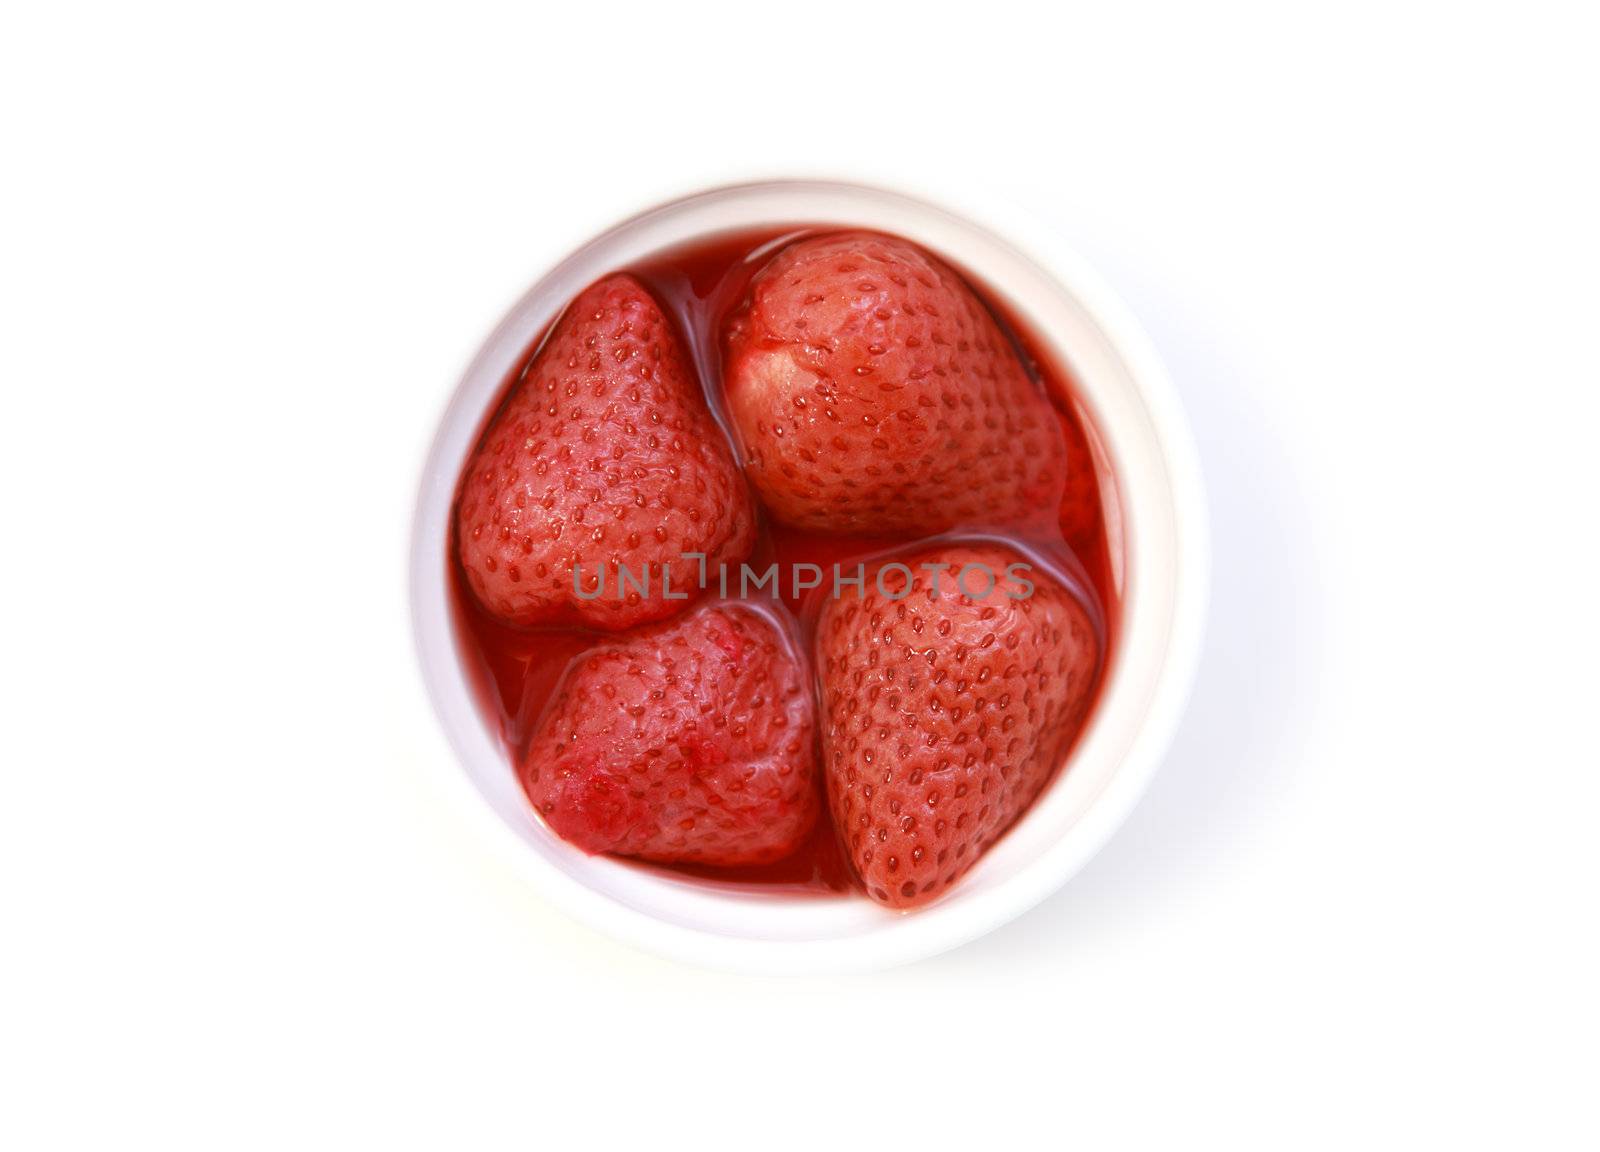 four strawberries in their own juice on the plate on white background